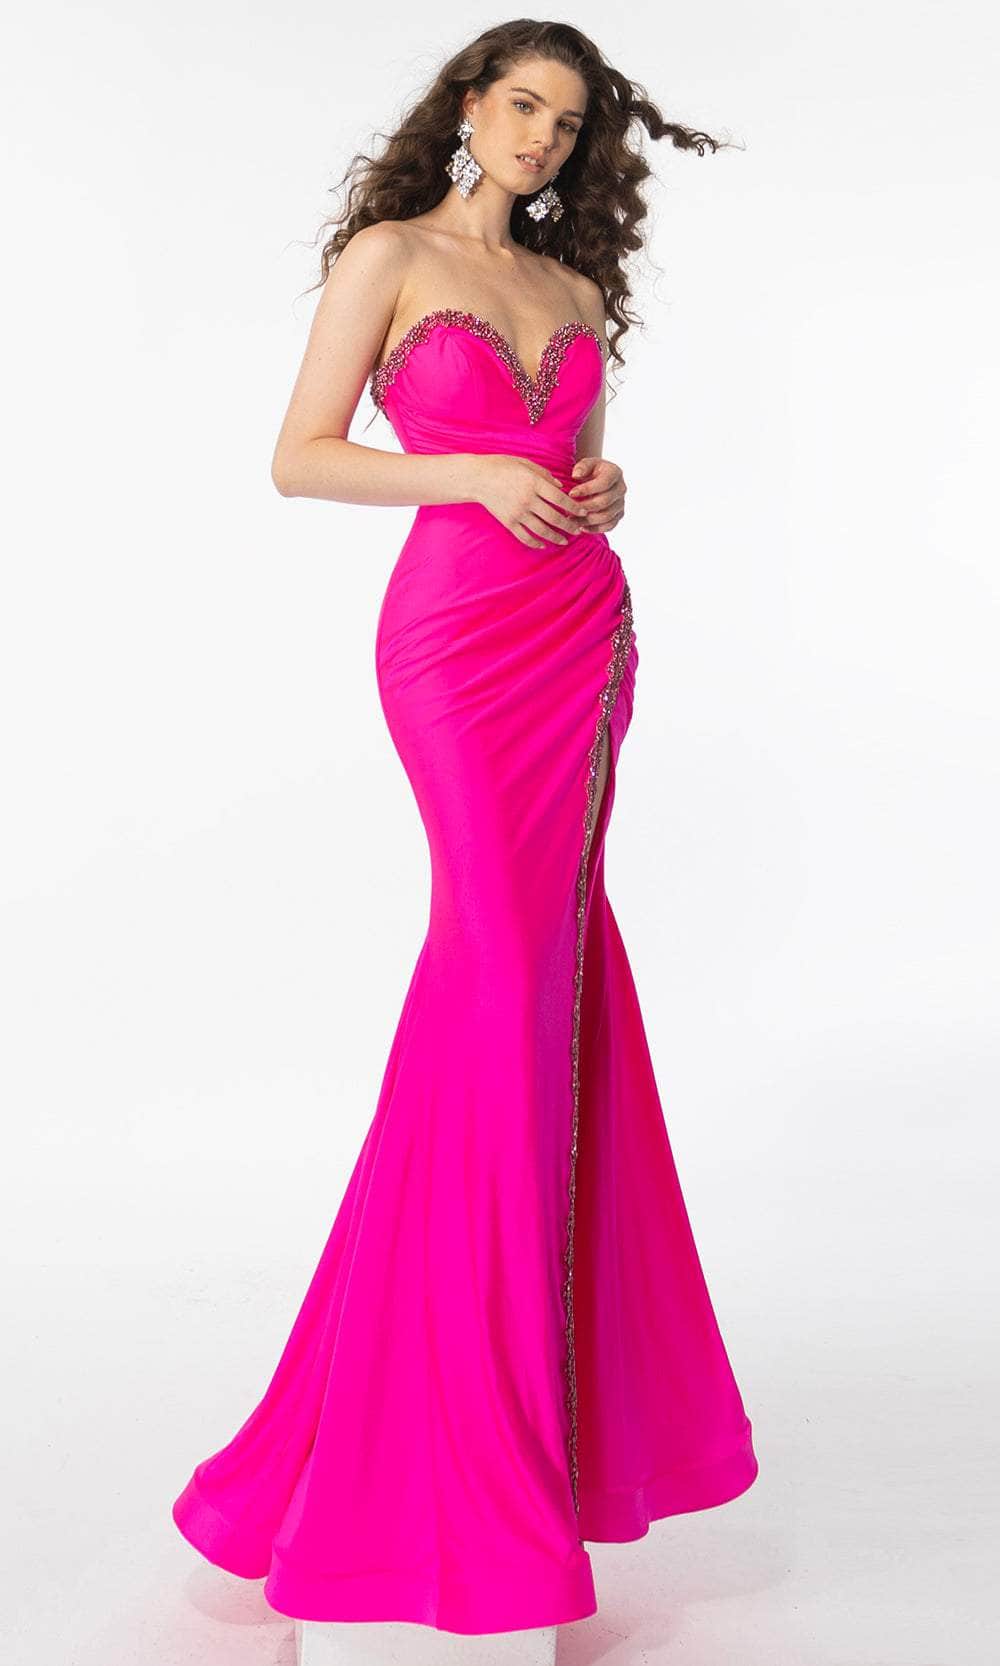 Image of Ava Presley 39290 - Strapless Beaded Trim Prom Gown